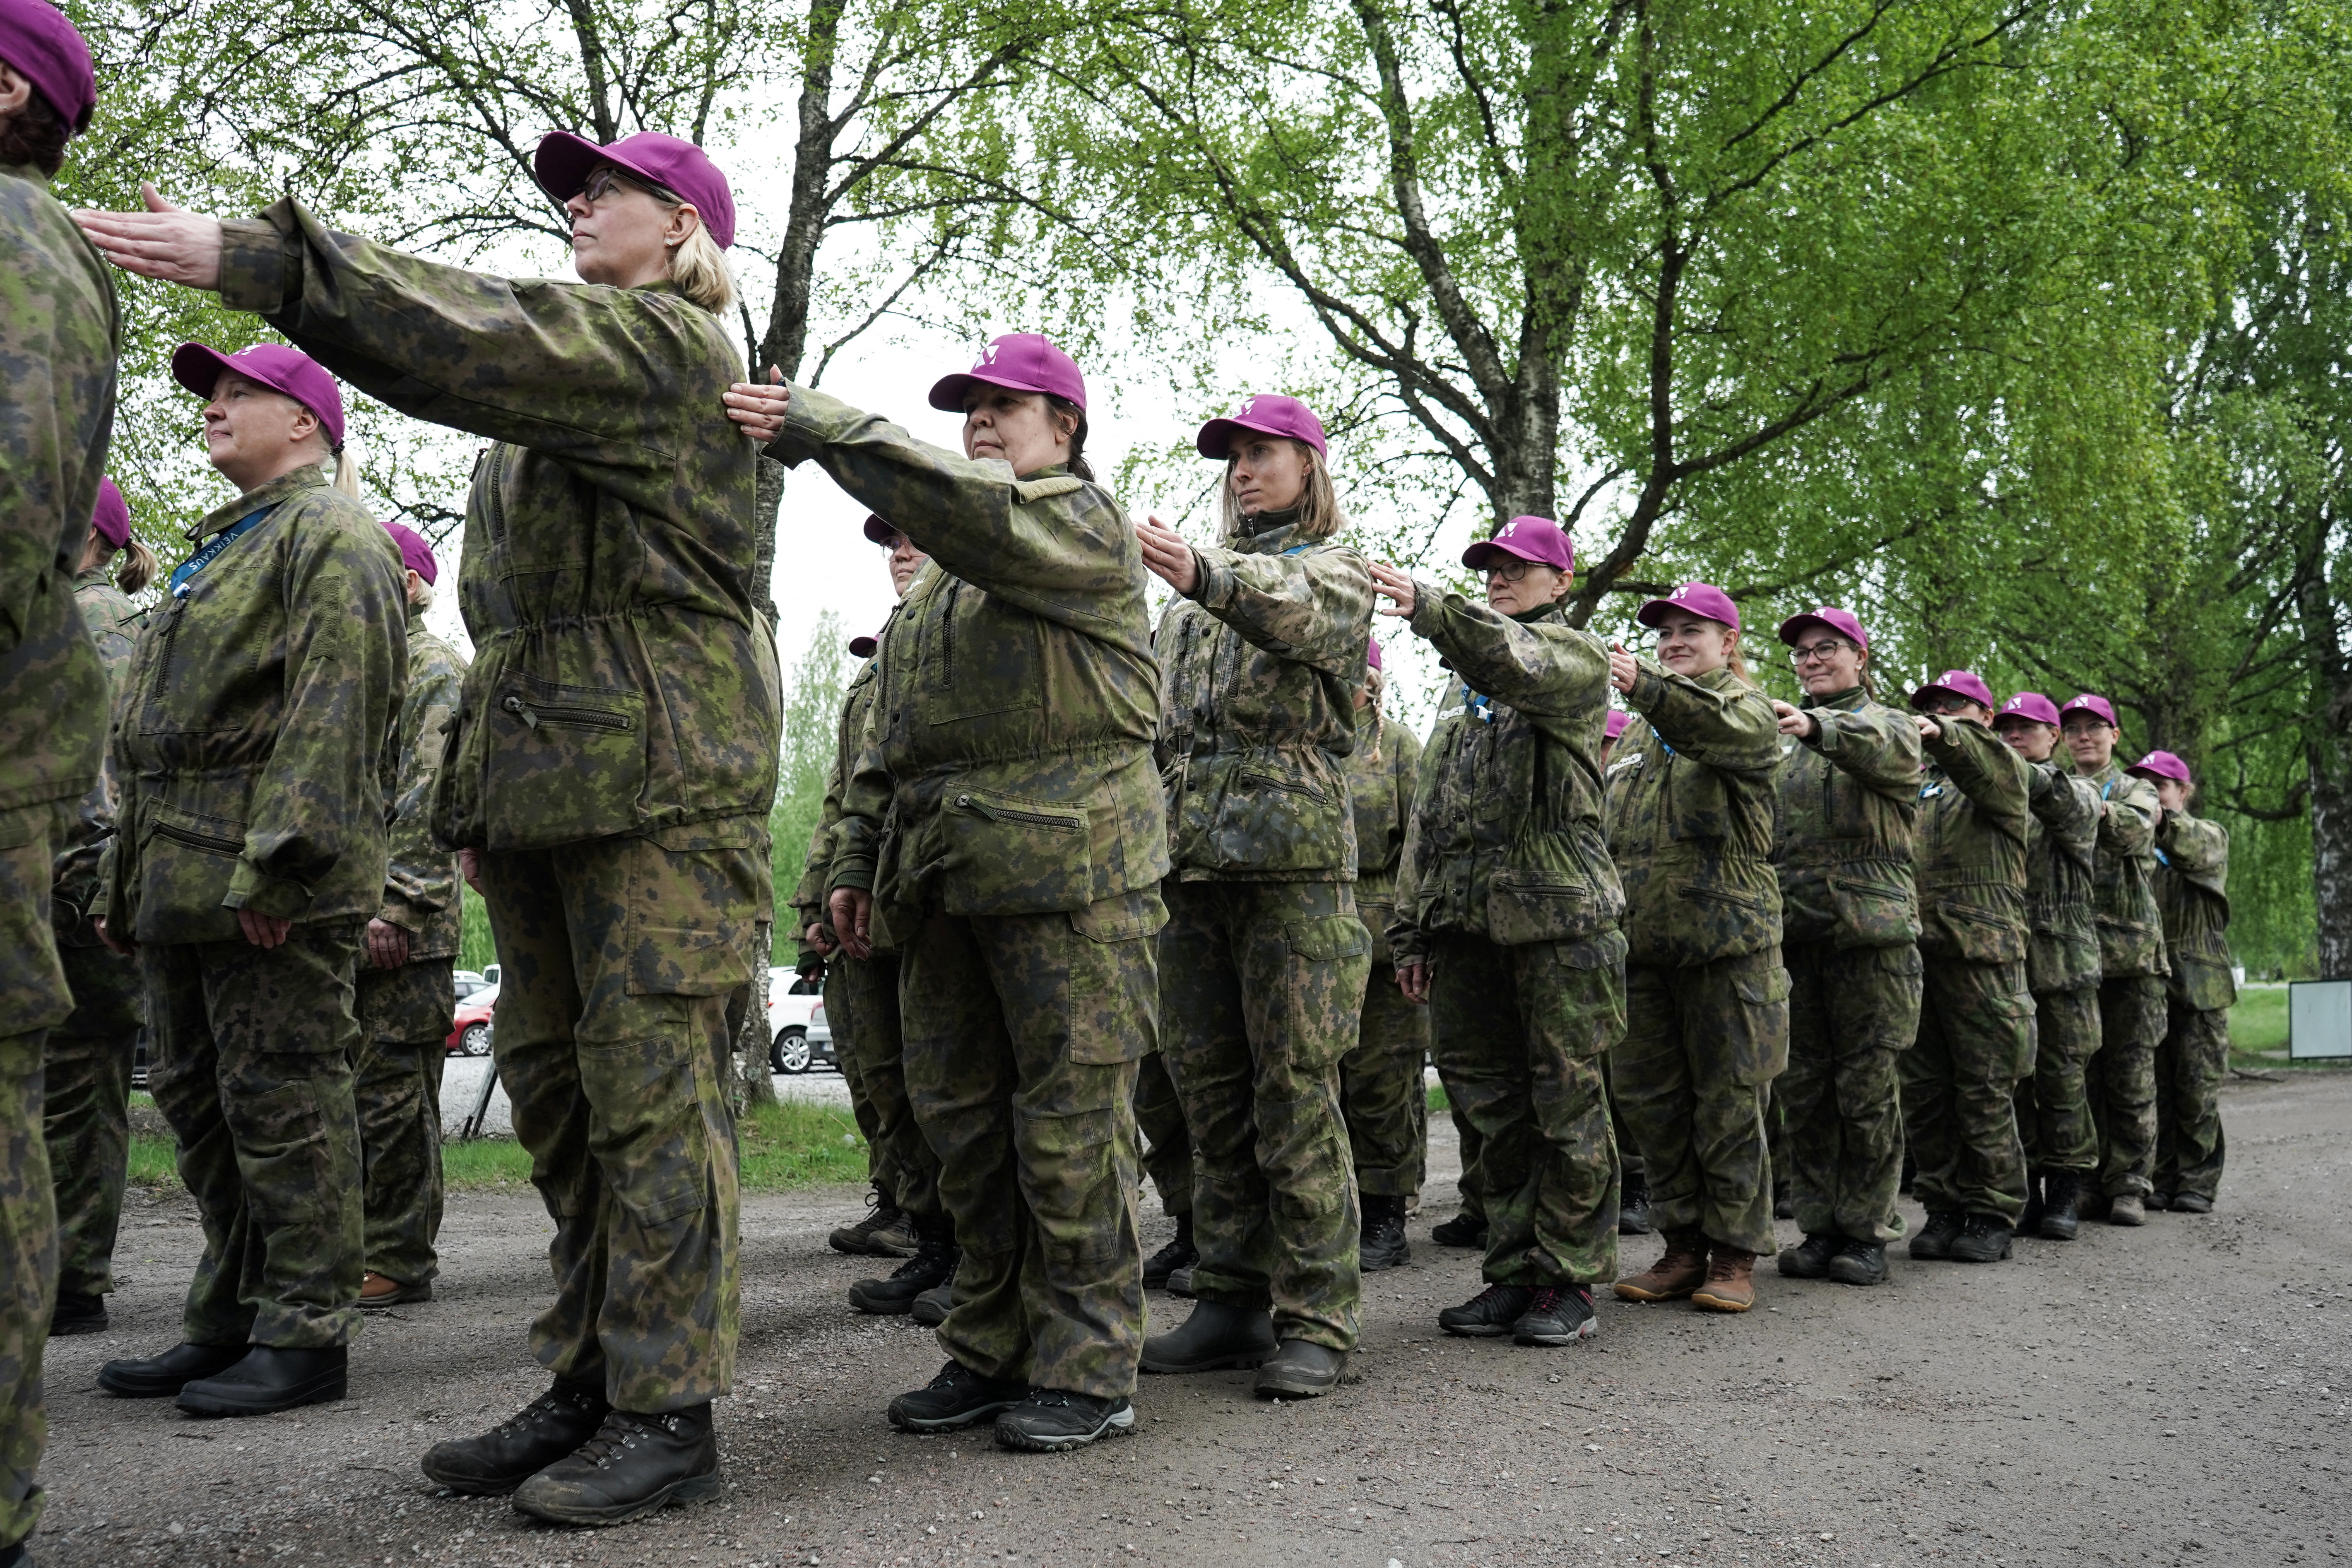 Worried about Russia, Finnish women sign up to learn defence skills Reuters image